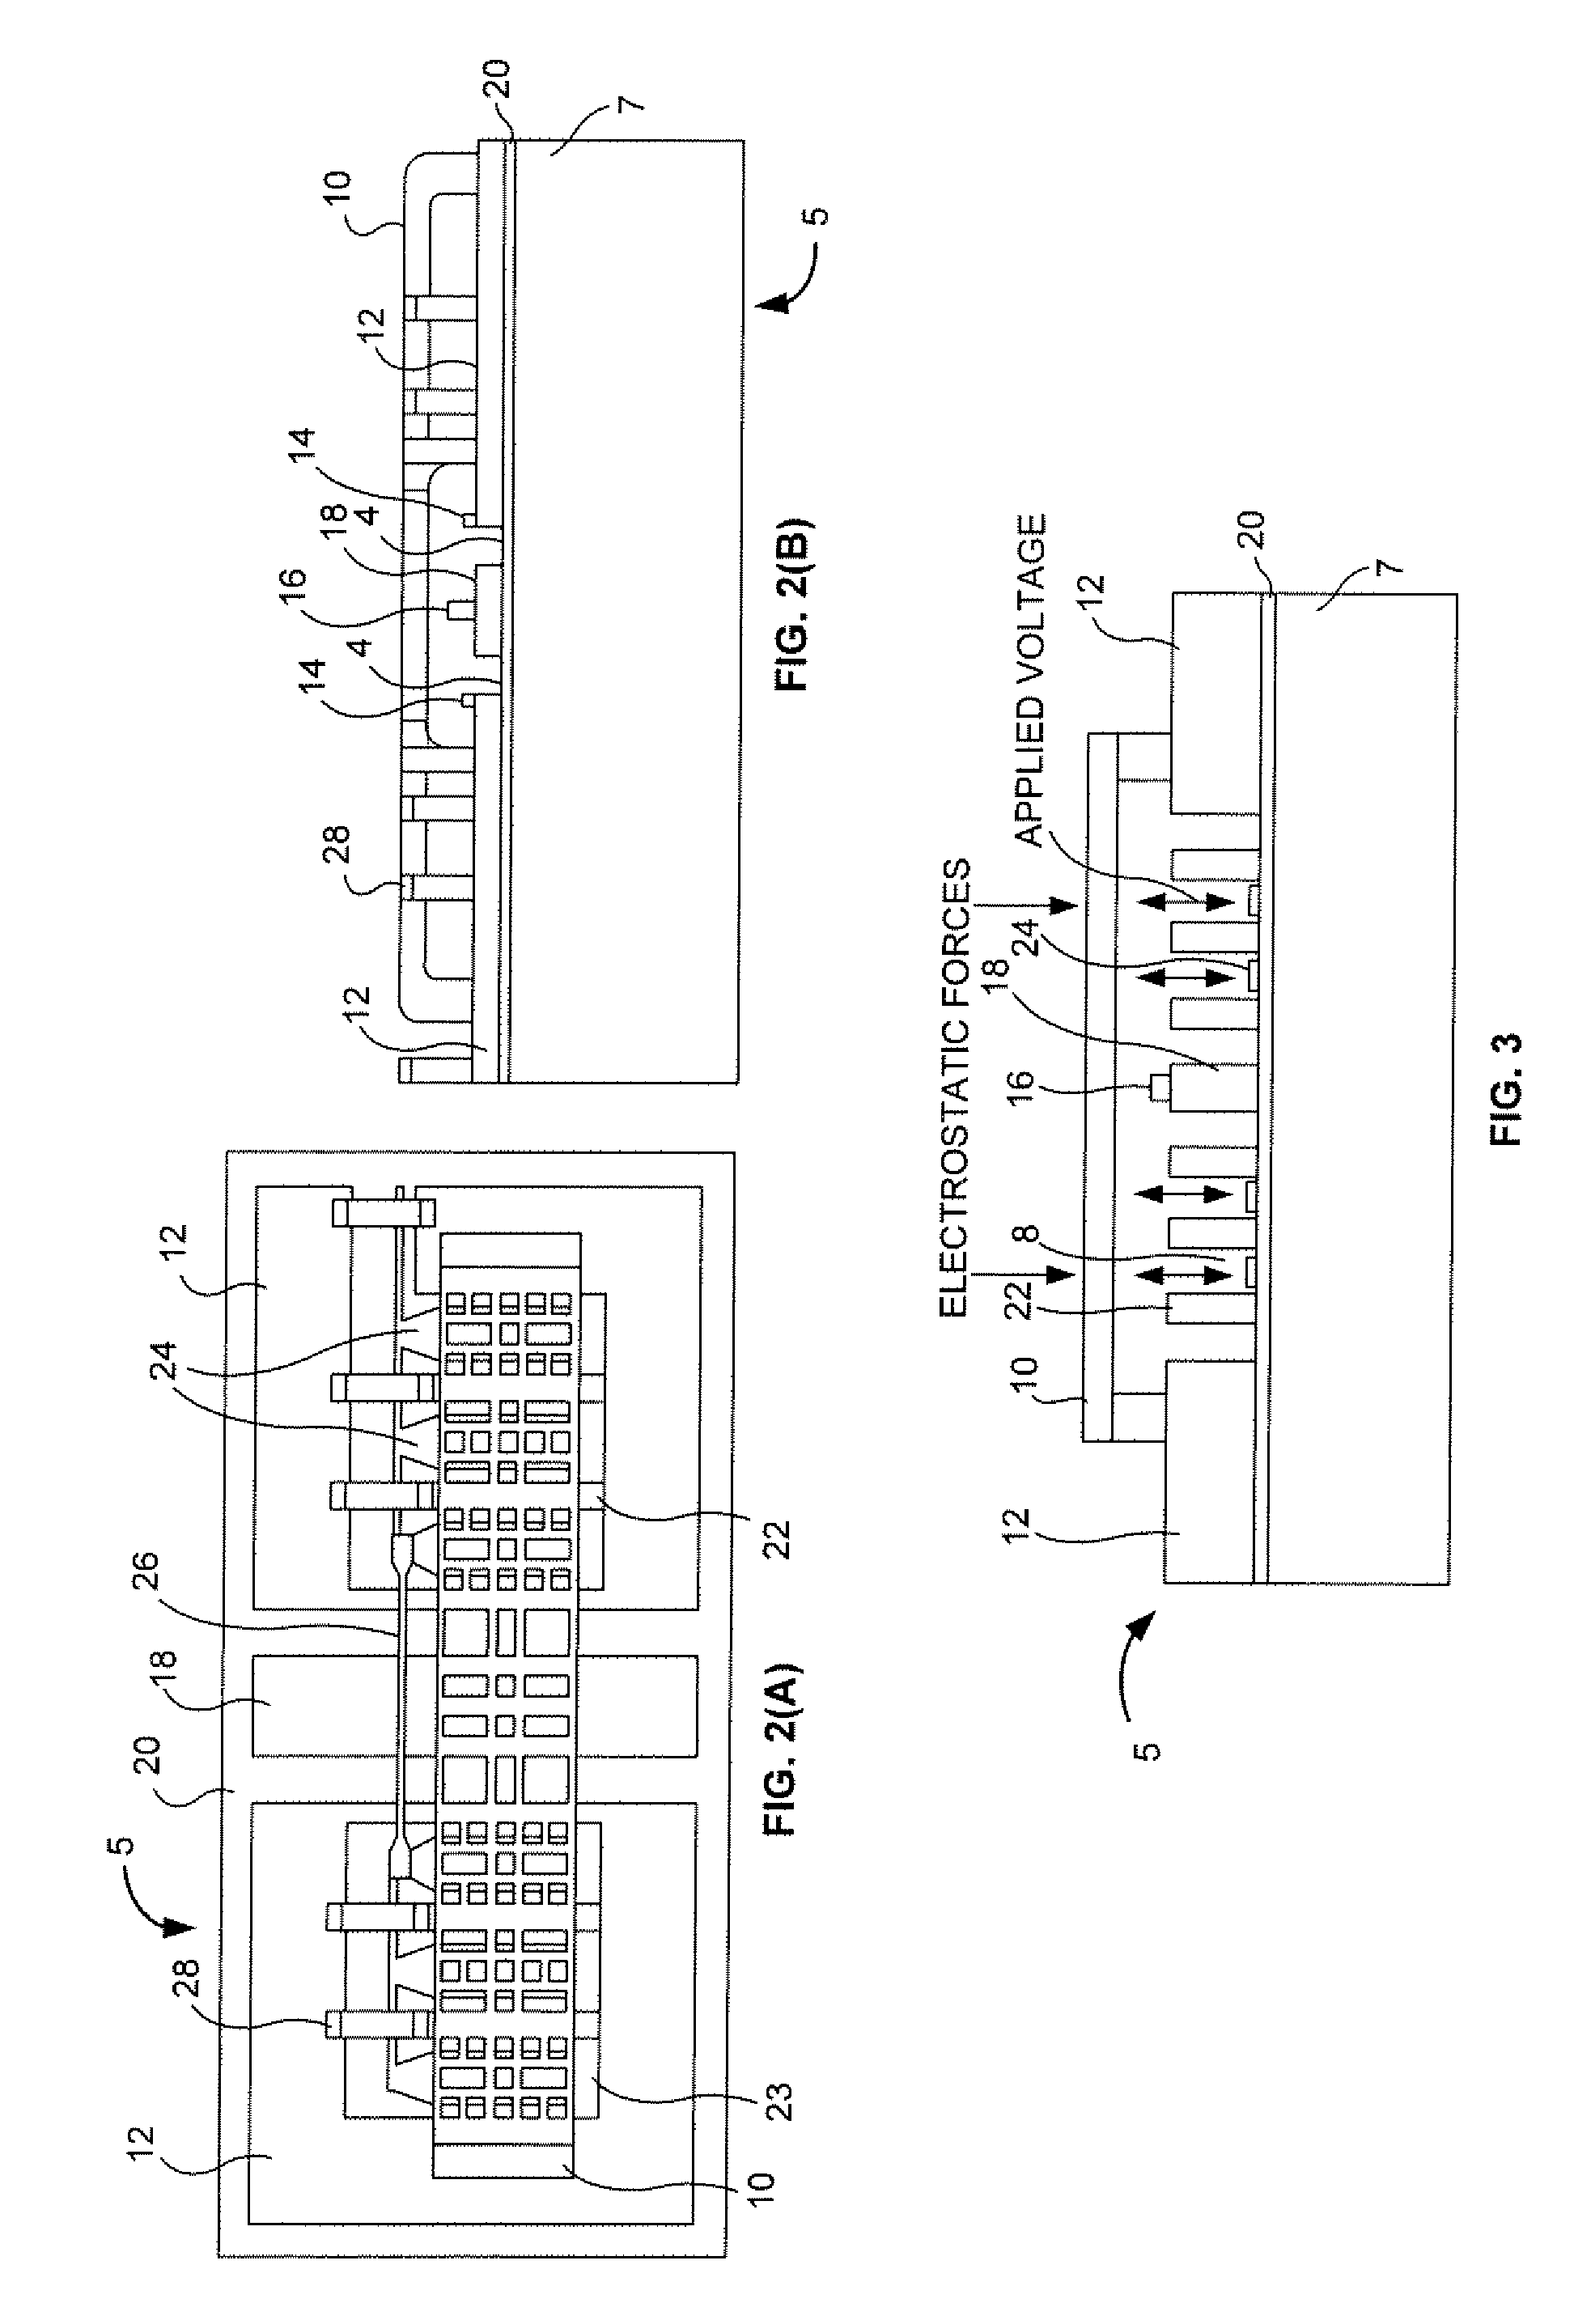 Electronic ohmic shunt RF MEMS switch and method of manufacture